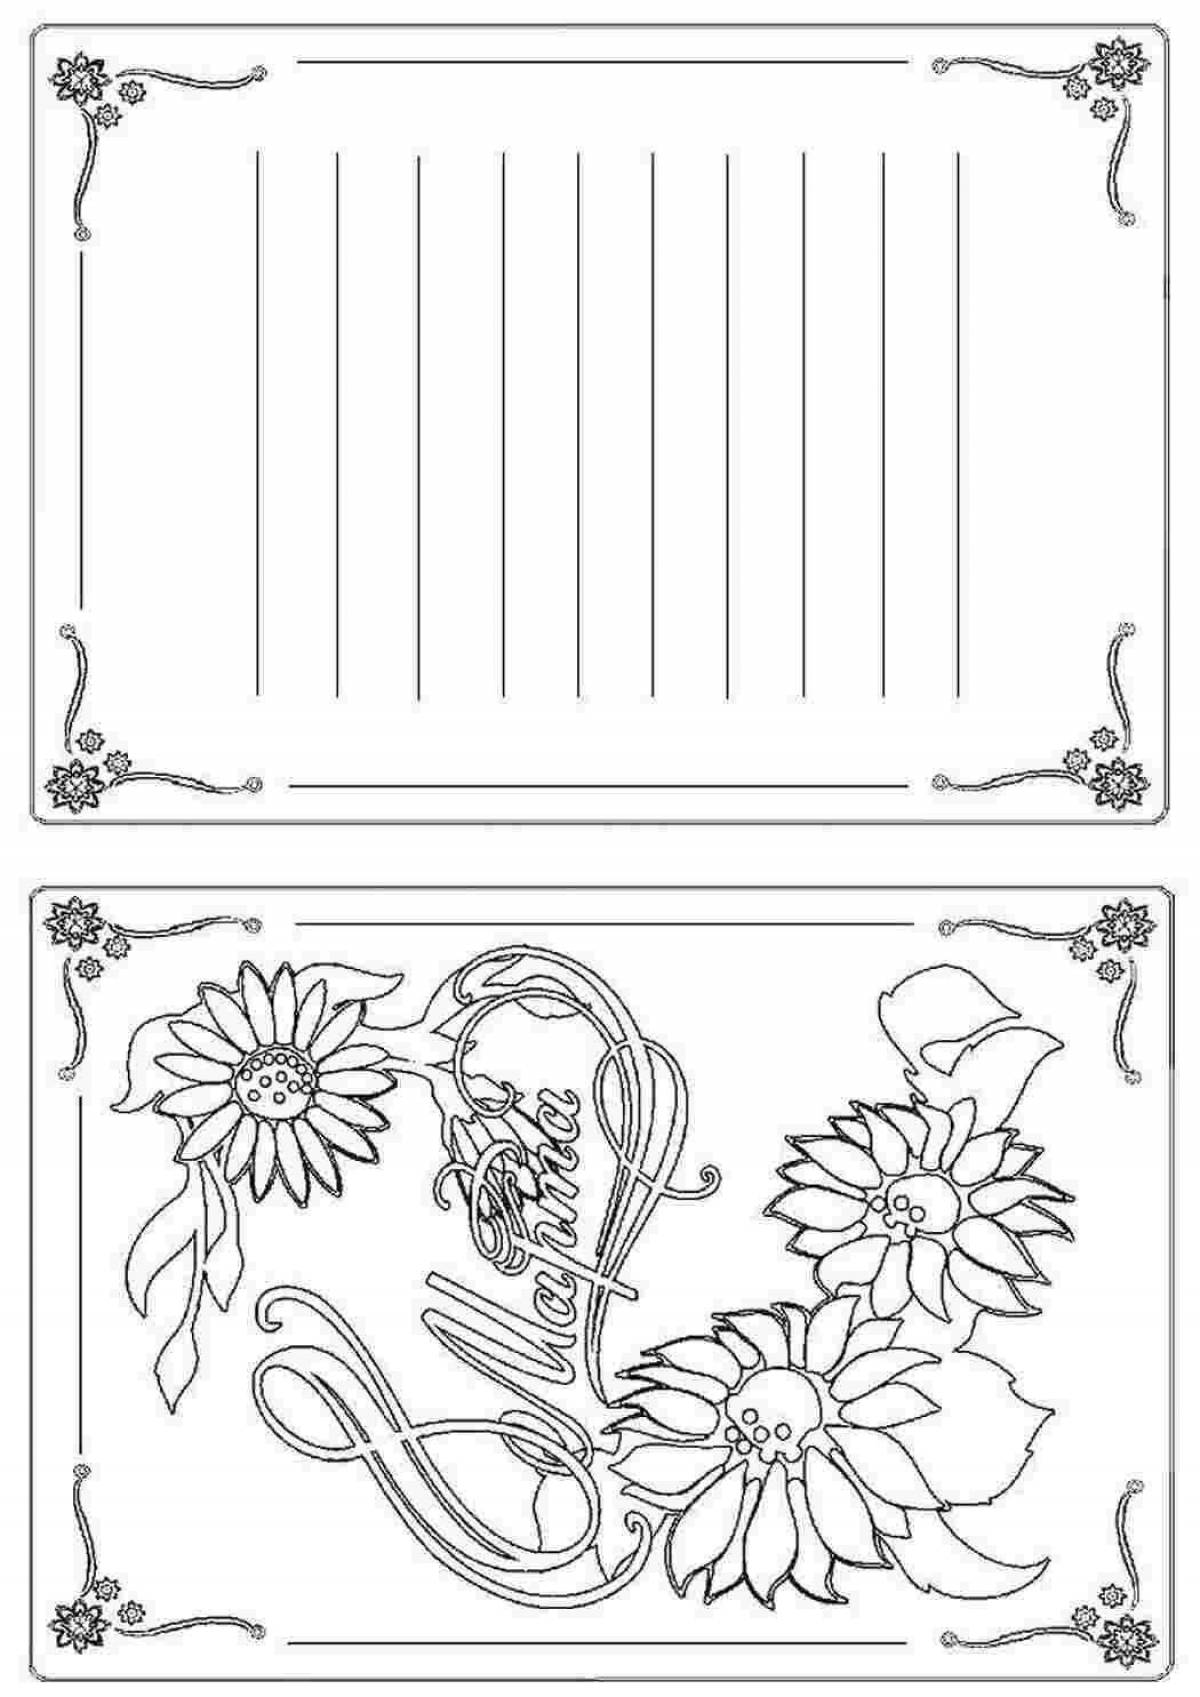 Coloring page exquisite birthday invitation for girls